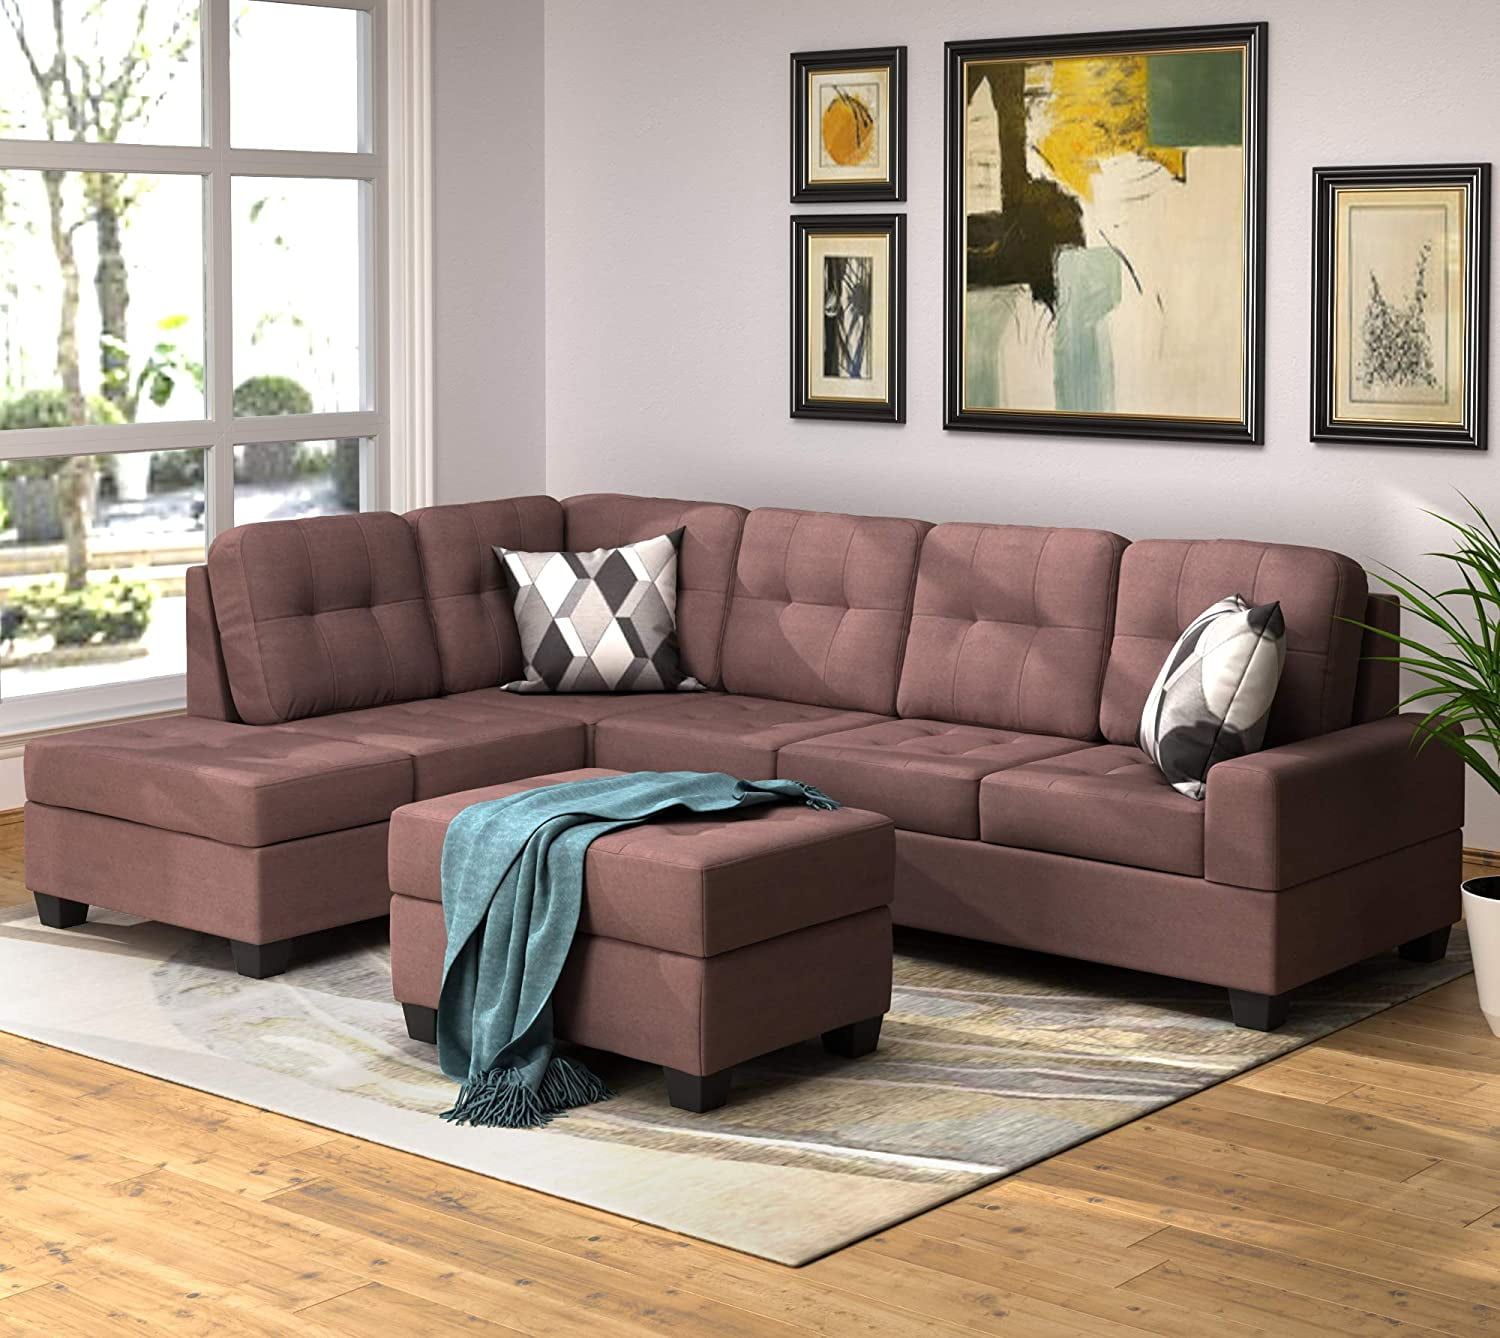 Soges Suede L Shape Sectional Sofa With Reversible Chaise Lounge For In L Shape Couches With Reversible Chaises (View 11 of 20)